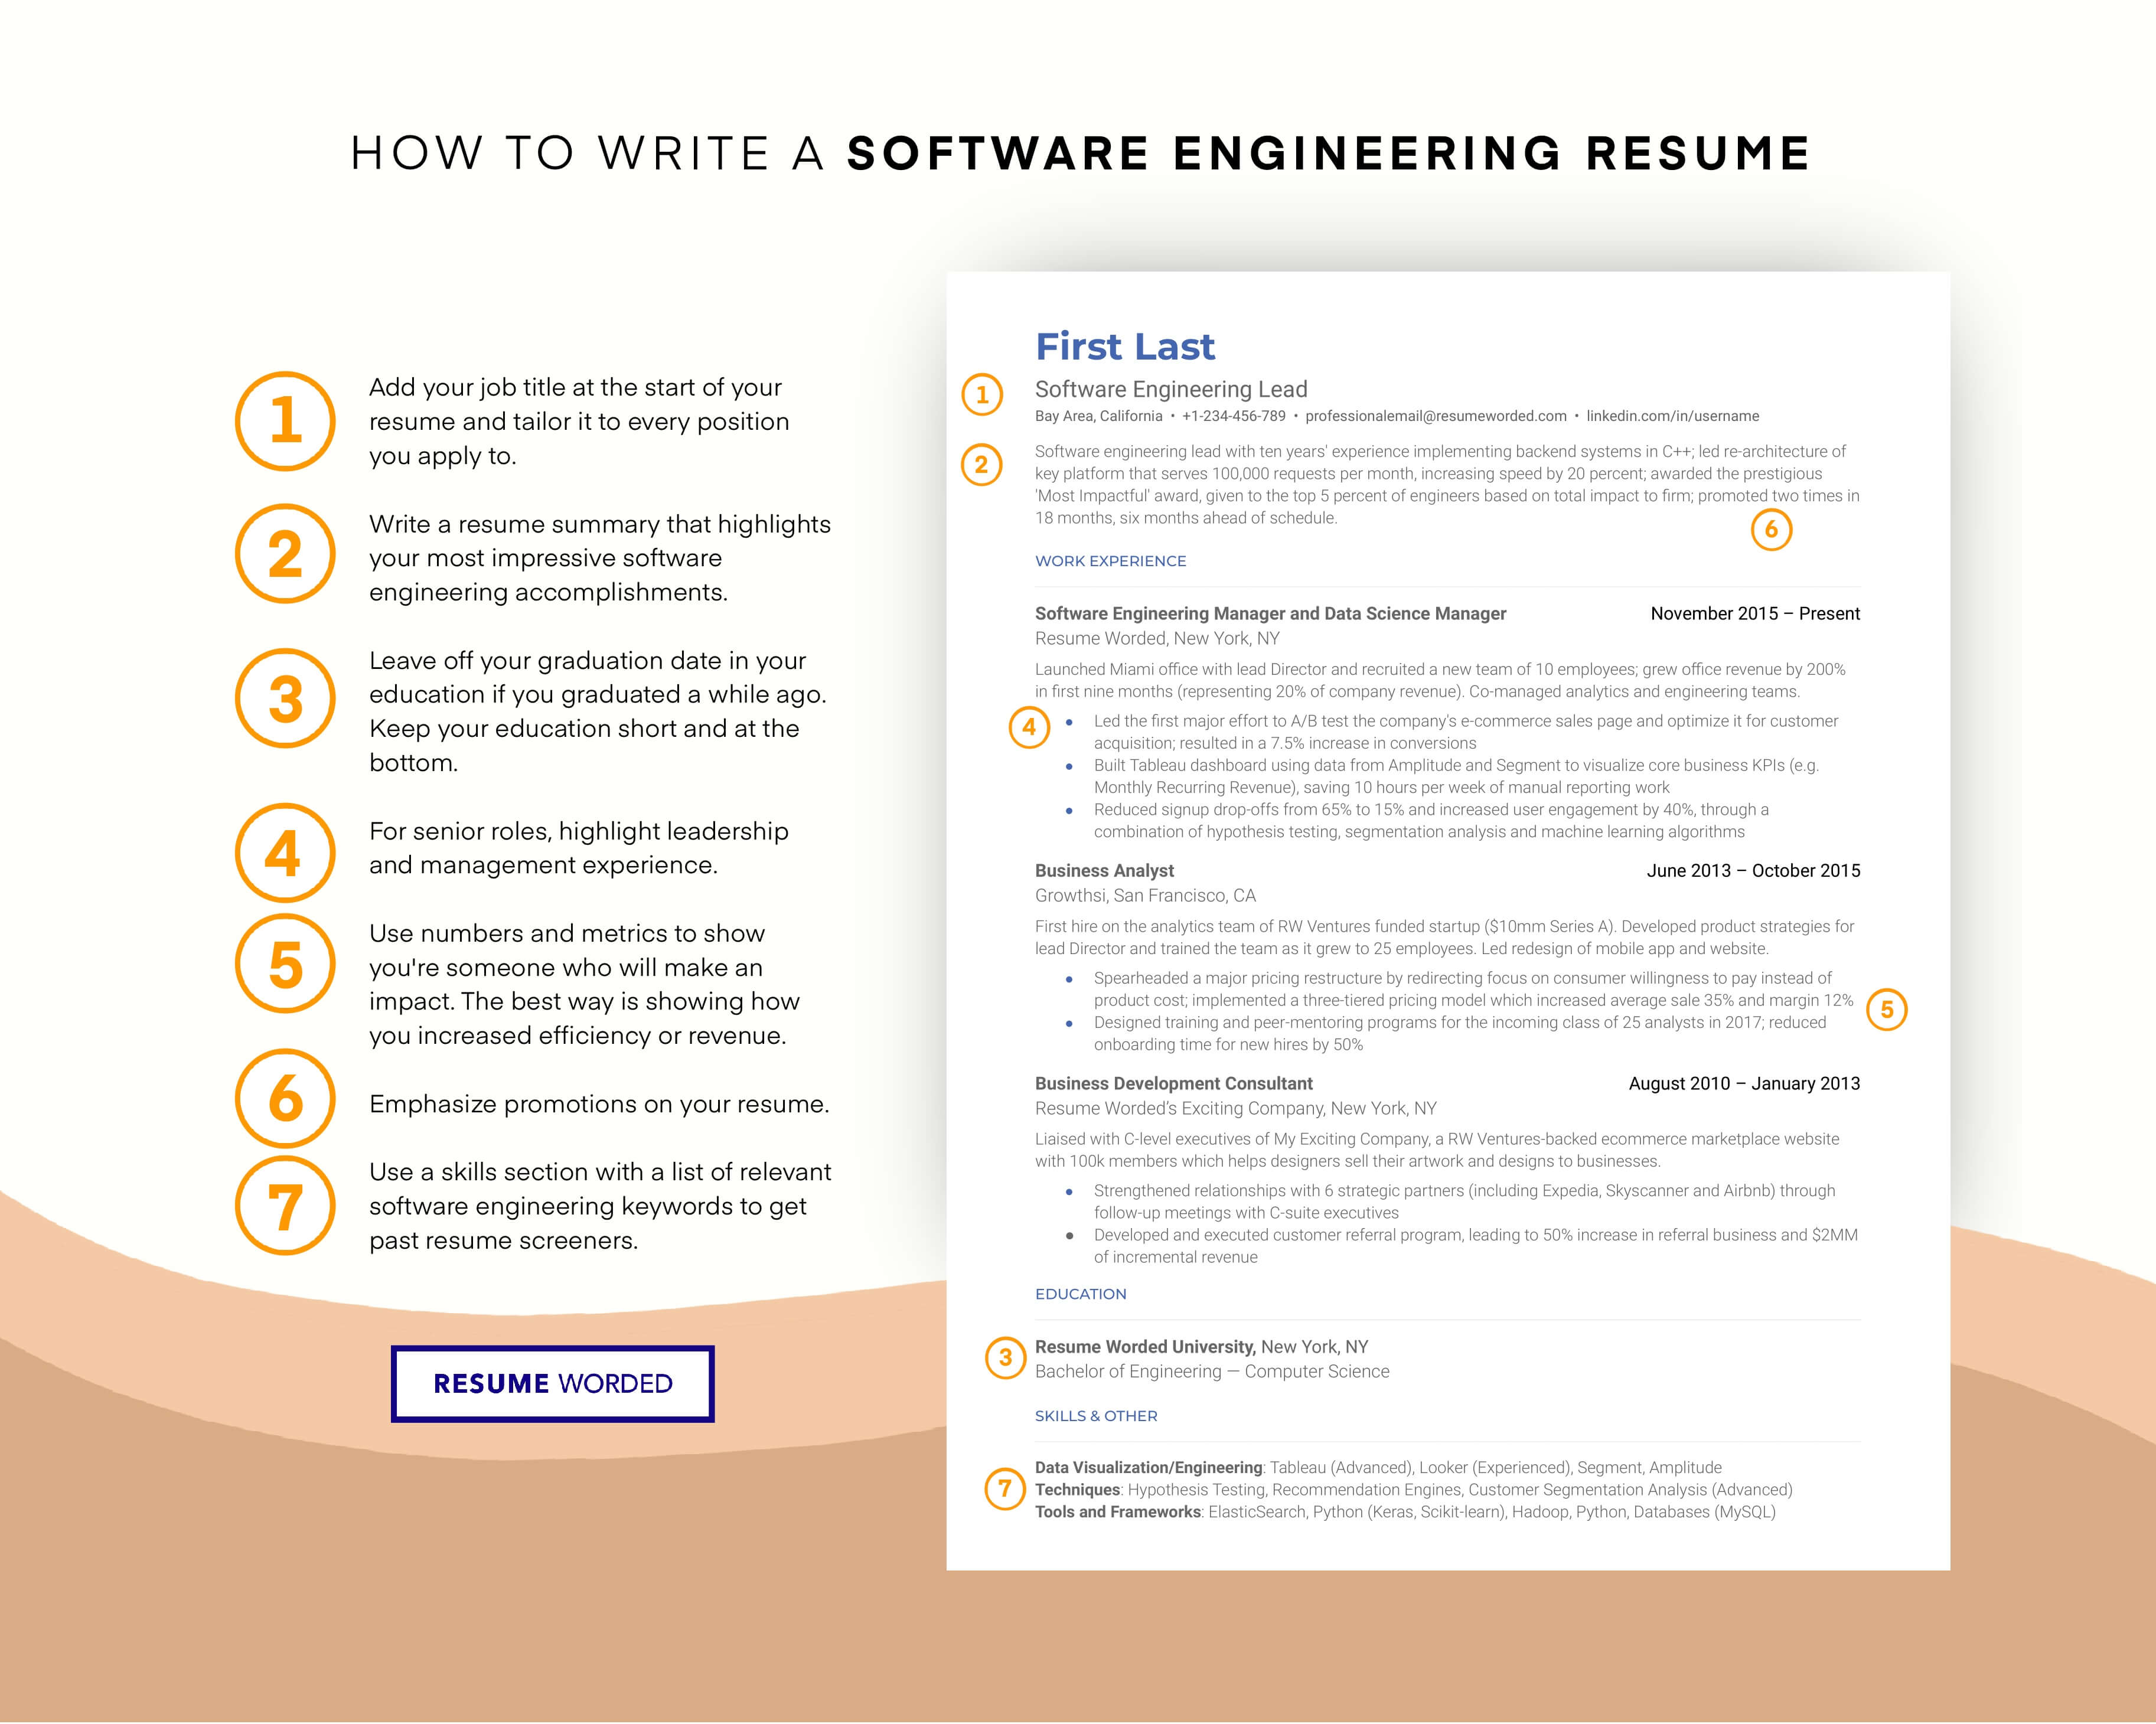 Show software-related certification. - Automation Tester Resume